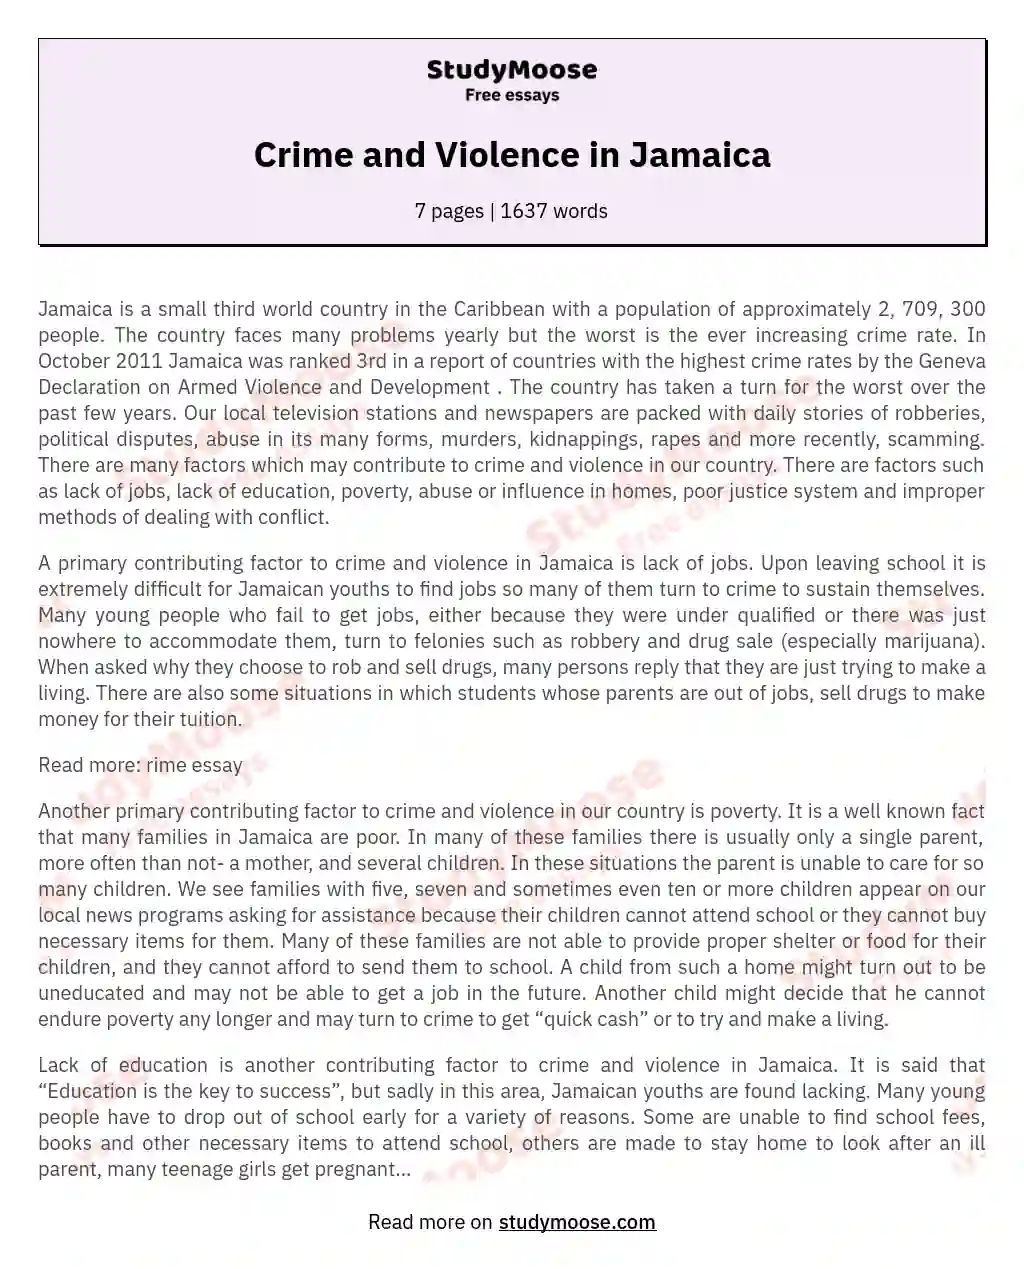 Crime and Violence in Jamaica essay